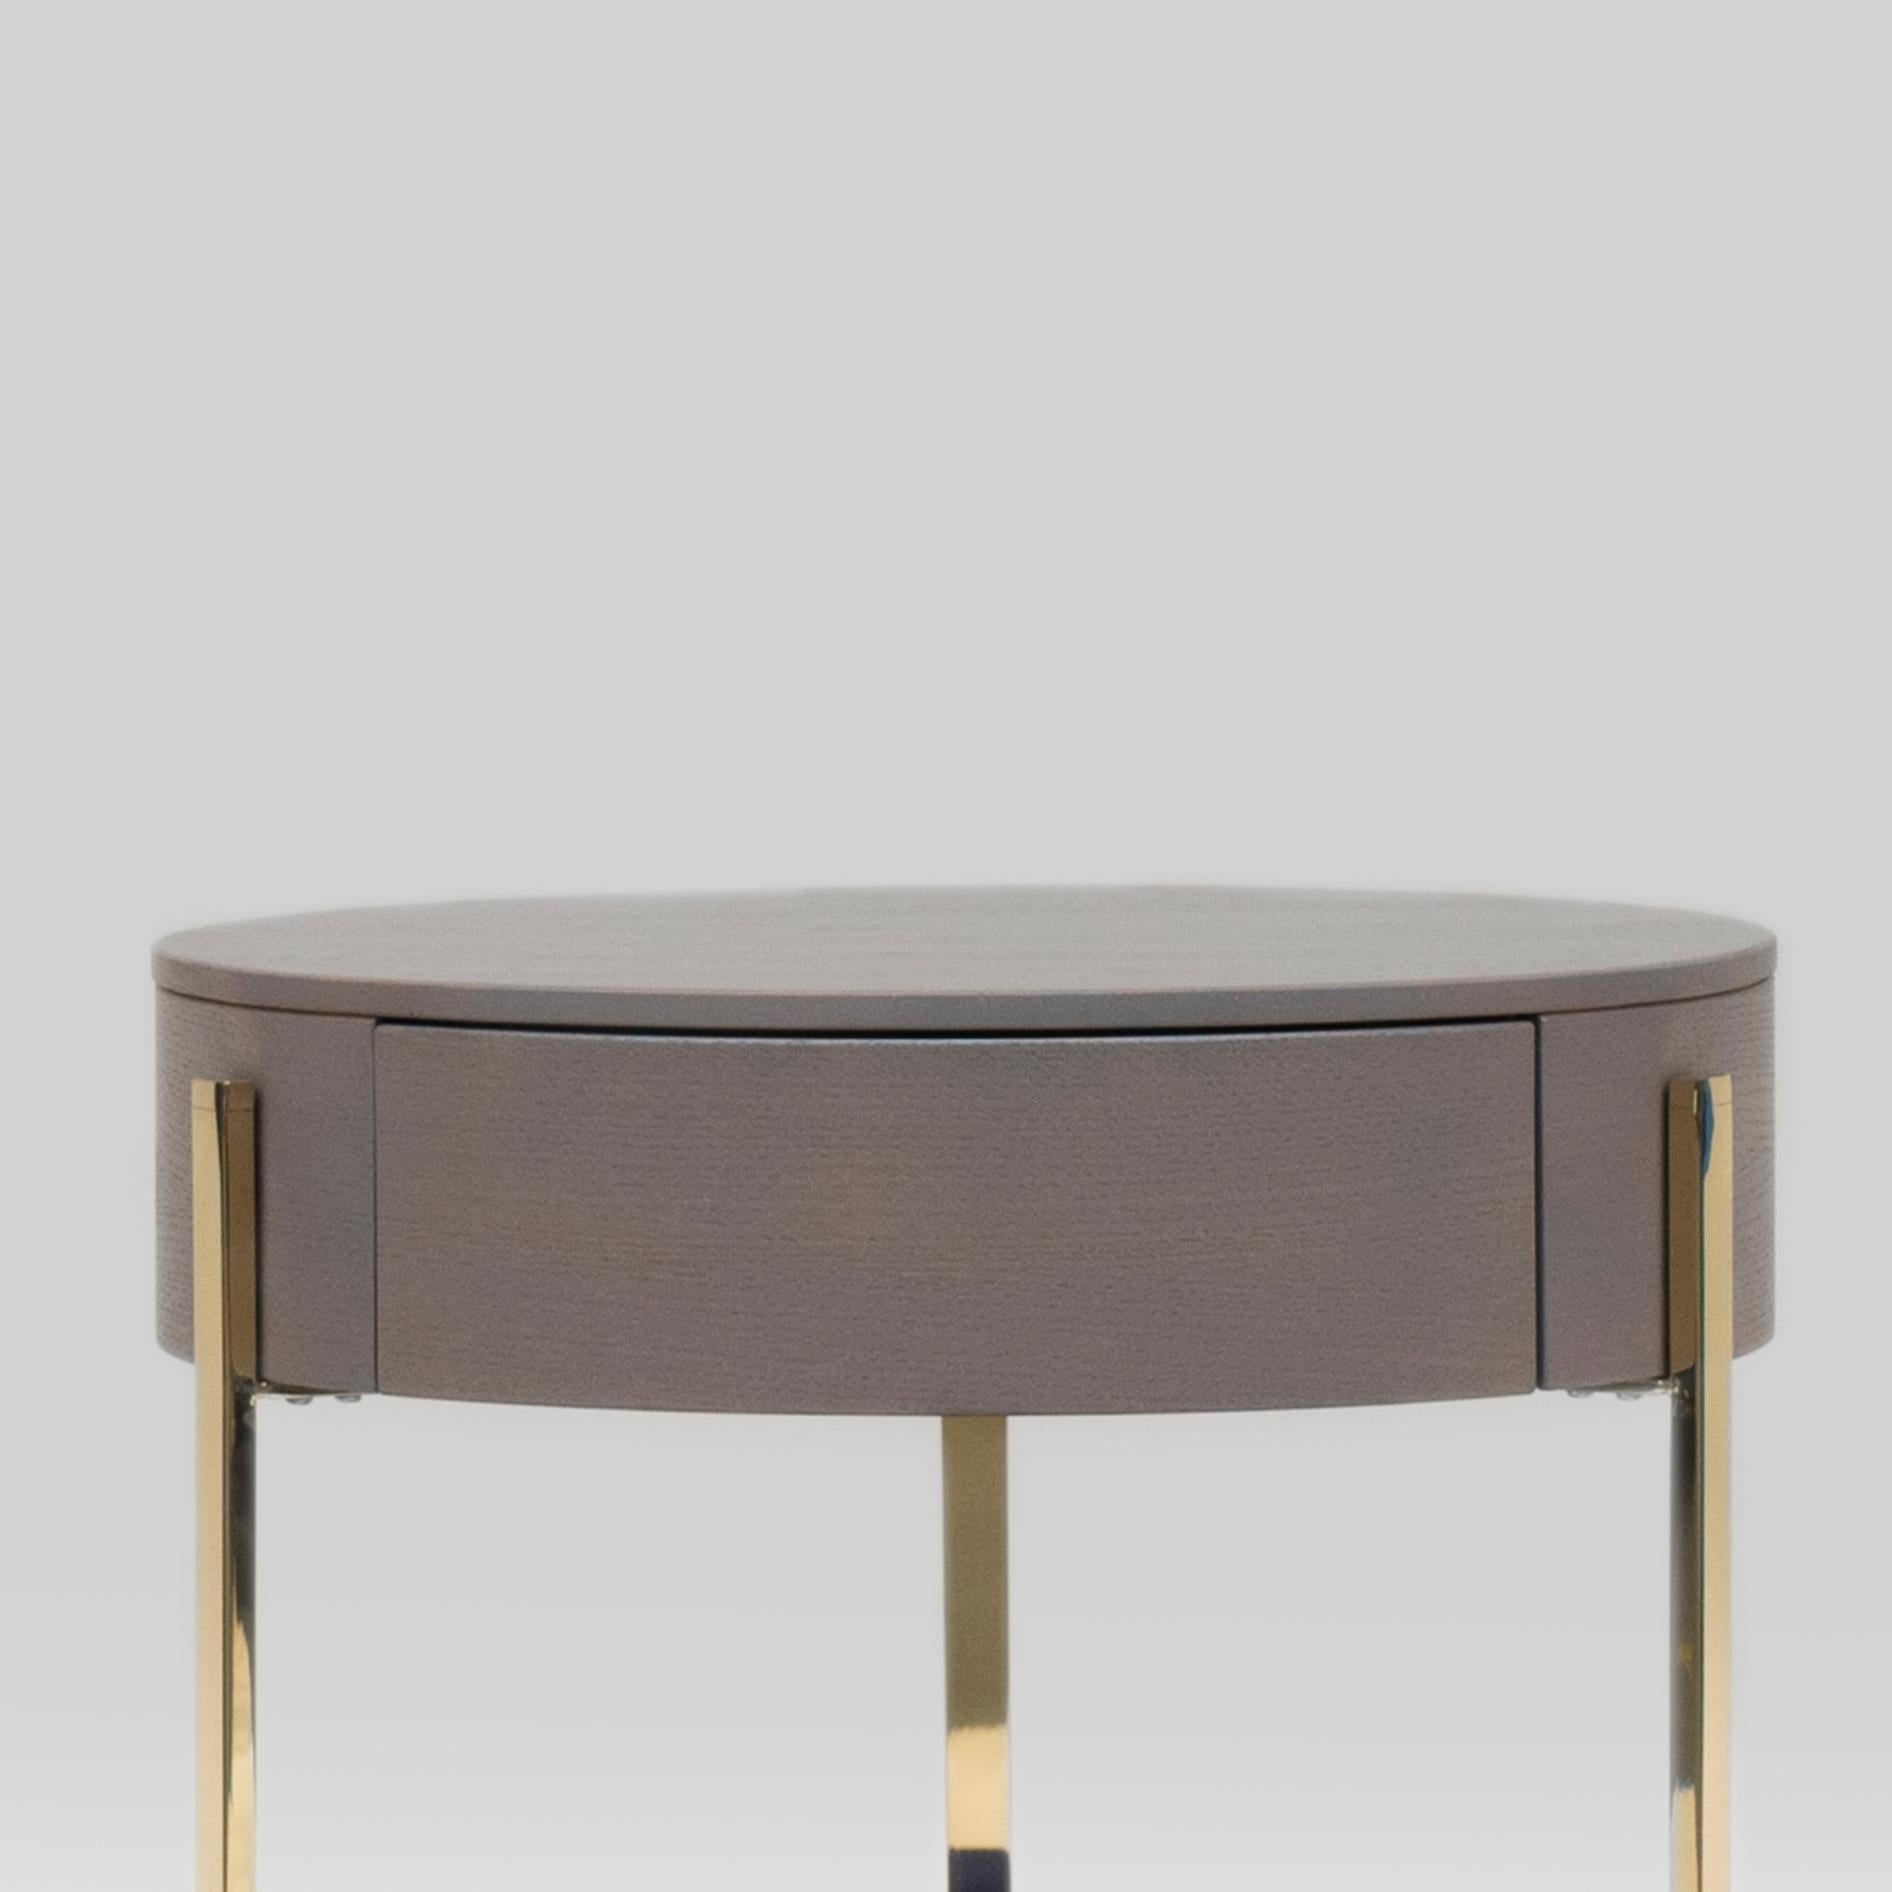 Contemporary Peter Ghyczy Side Table Pioneer Alice 'T79L' Brass Gloss / Oak 2557 / RAL 5002